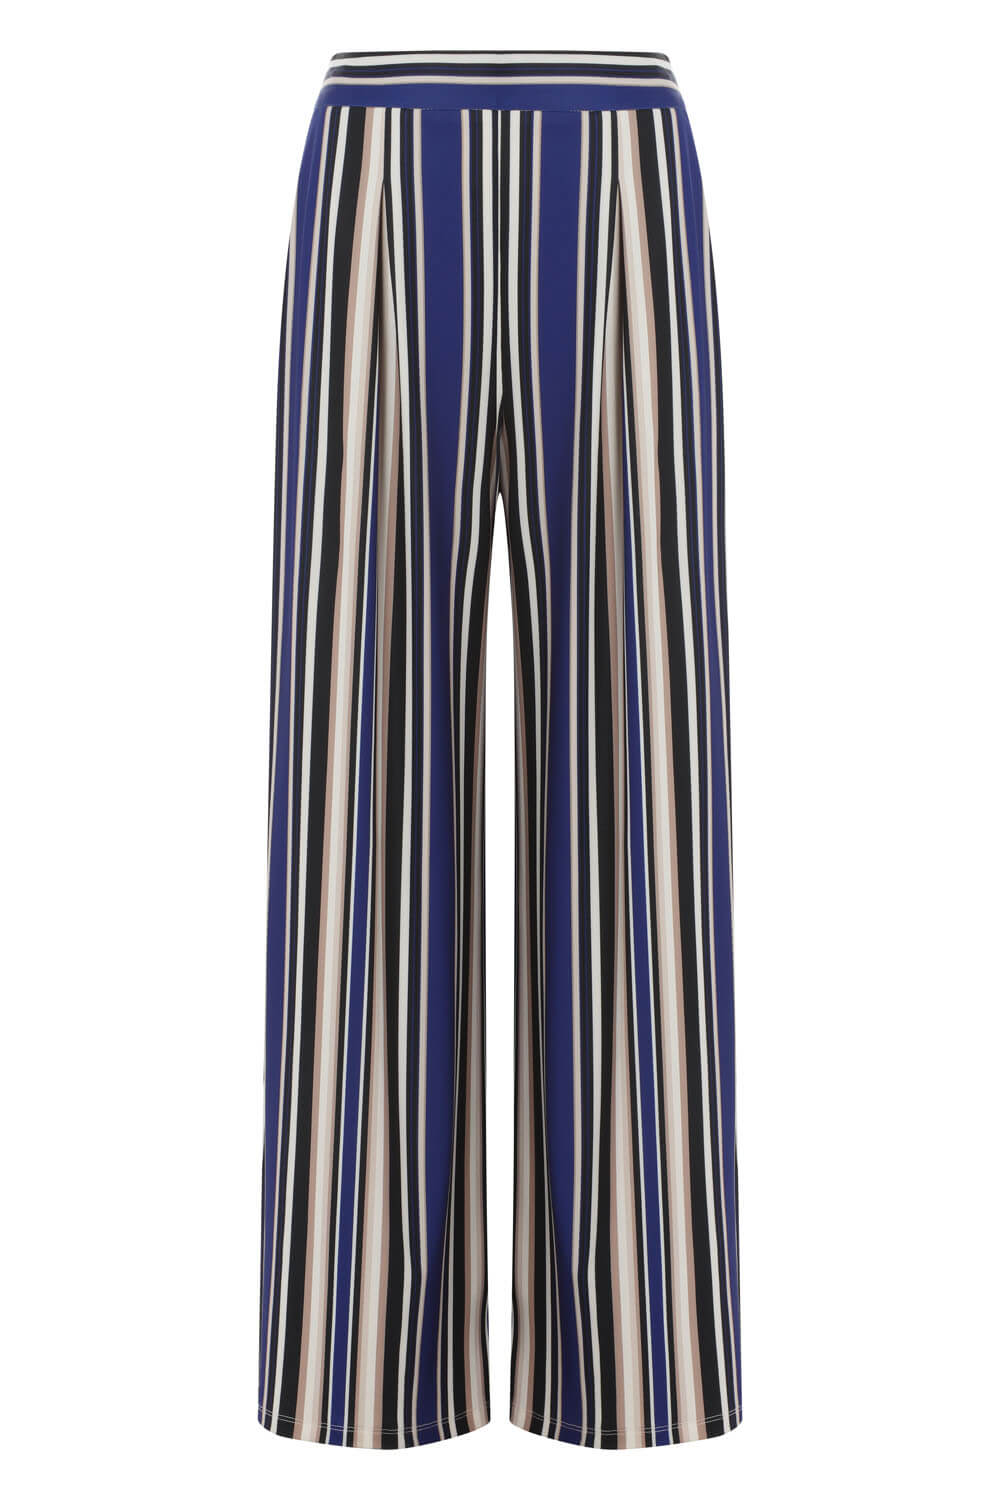 Blue Stripe Ribbed Palazzo Trousers , Image 5 of 5